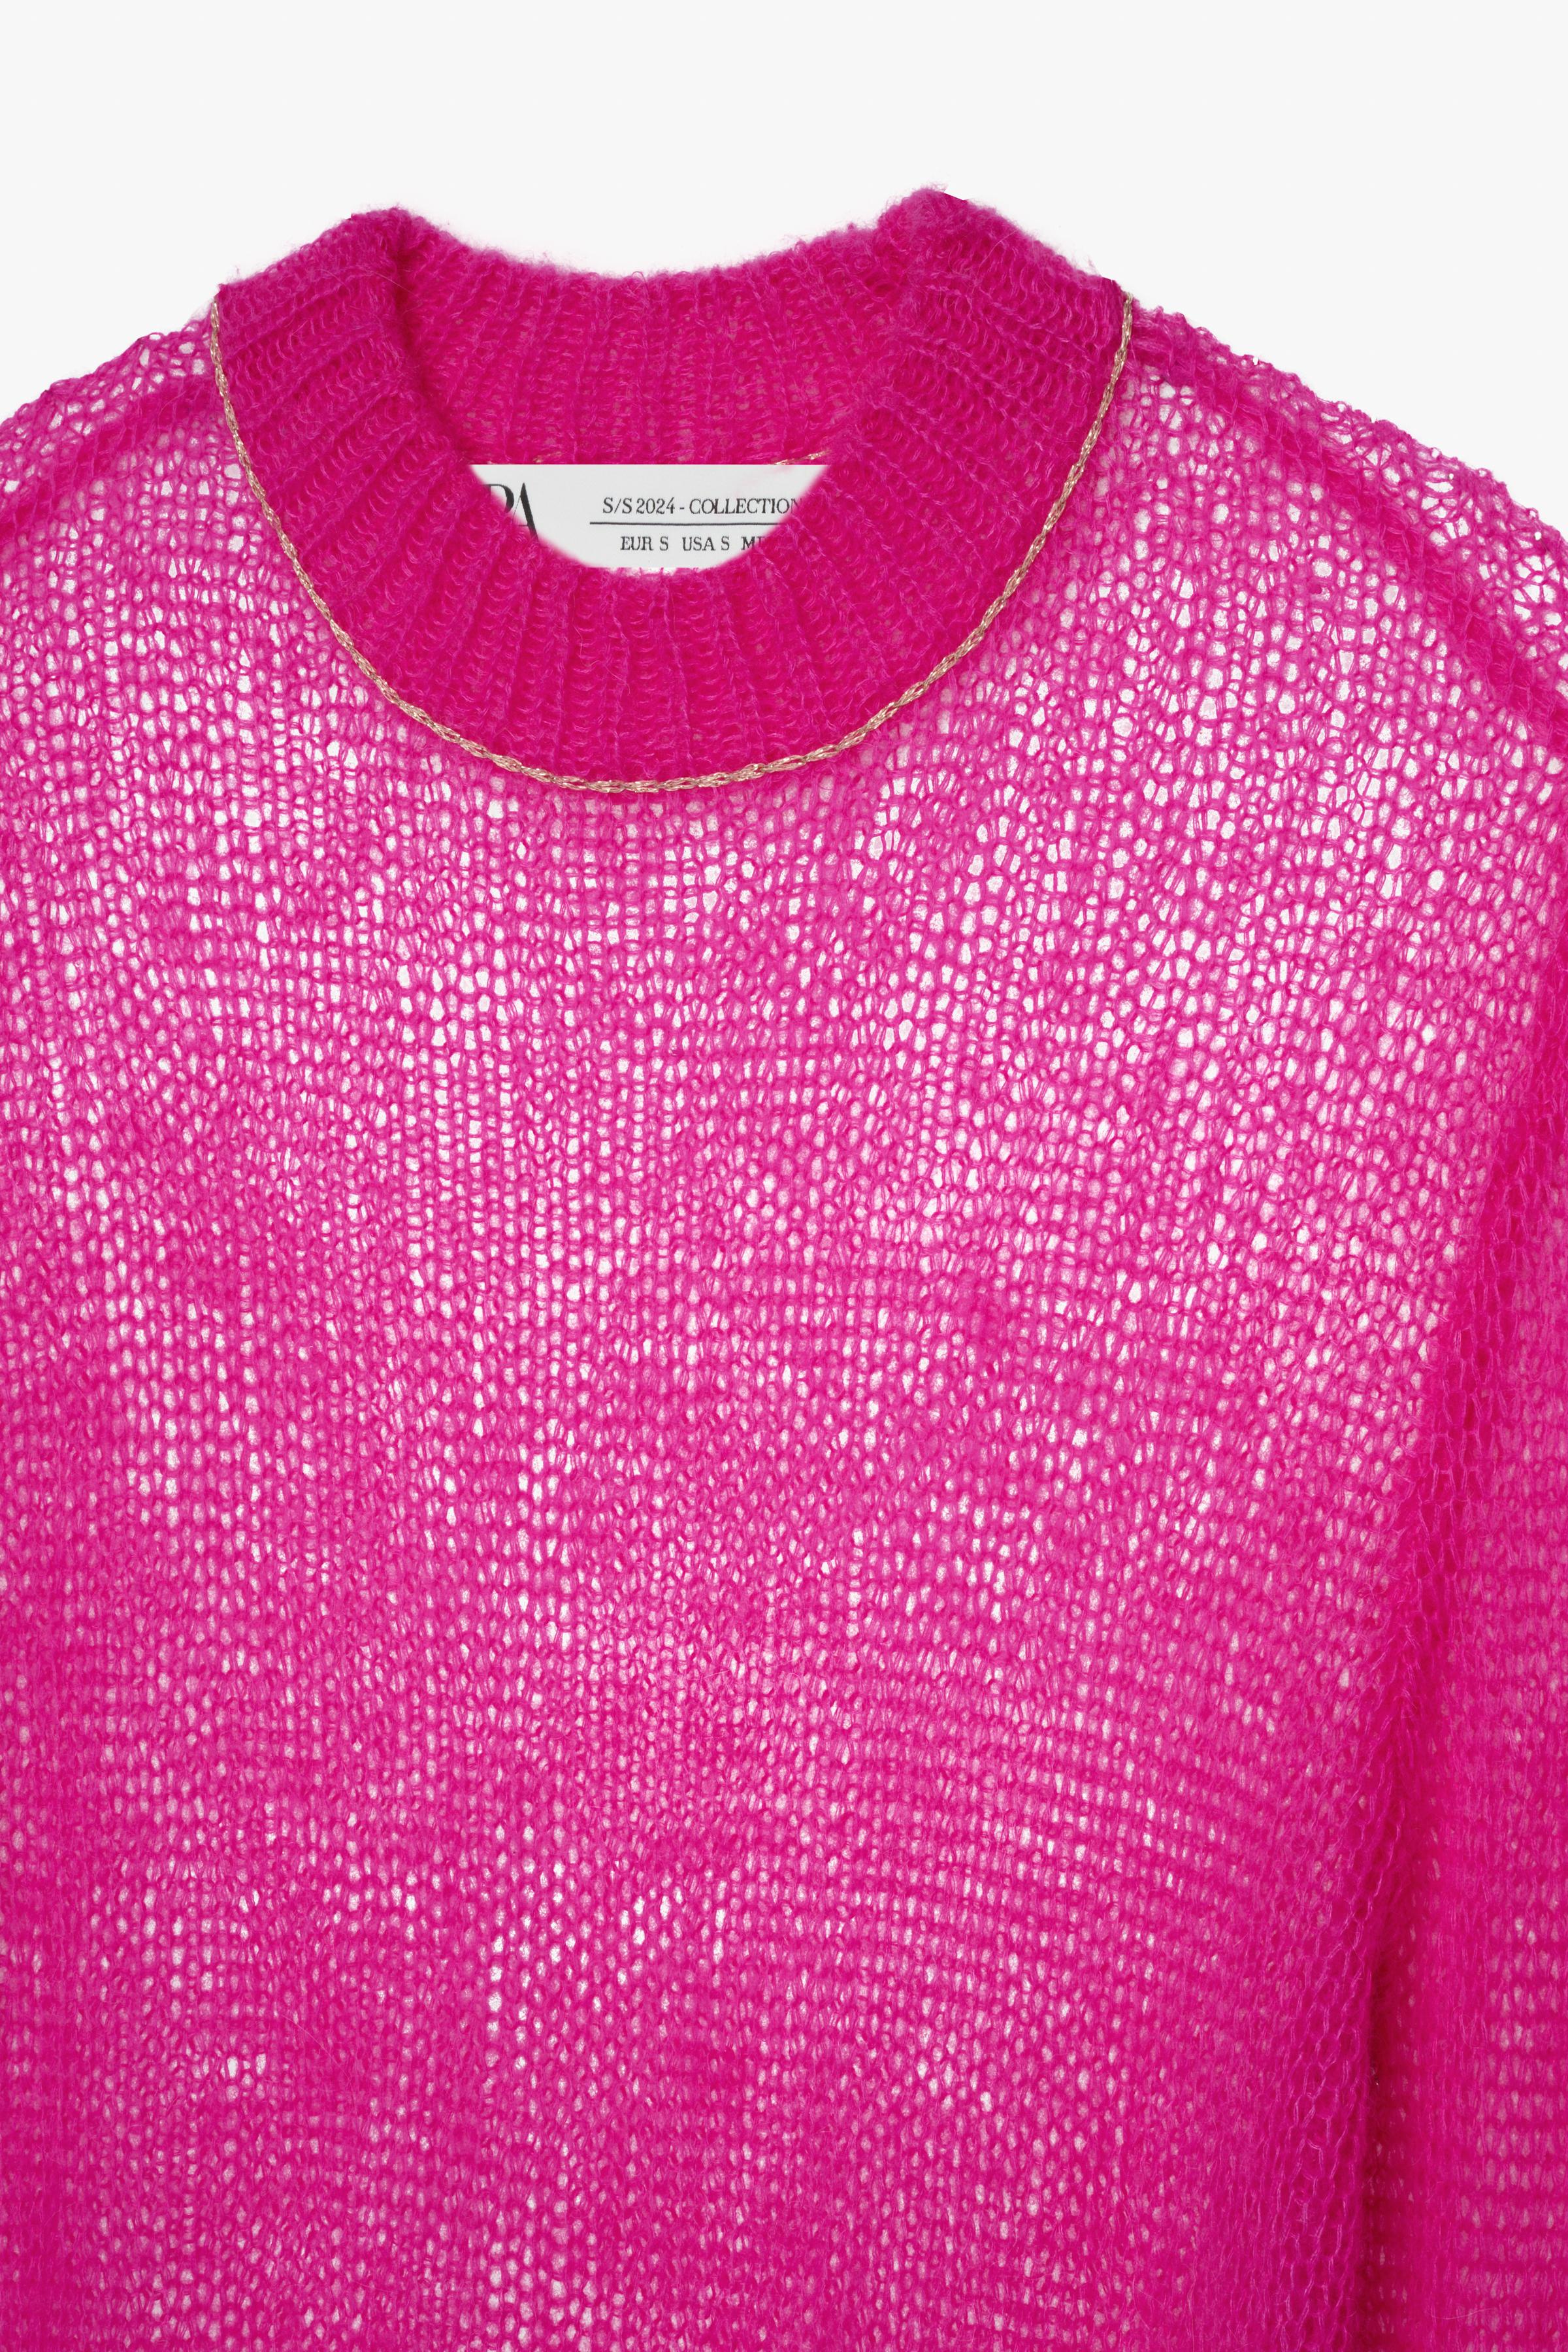 WOOL BLEND OPENWORK KNIT SWEATER LIMITED EDITION